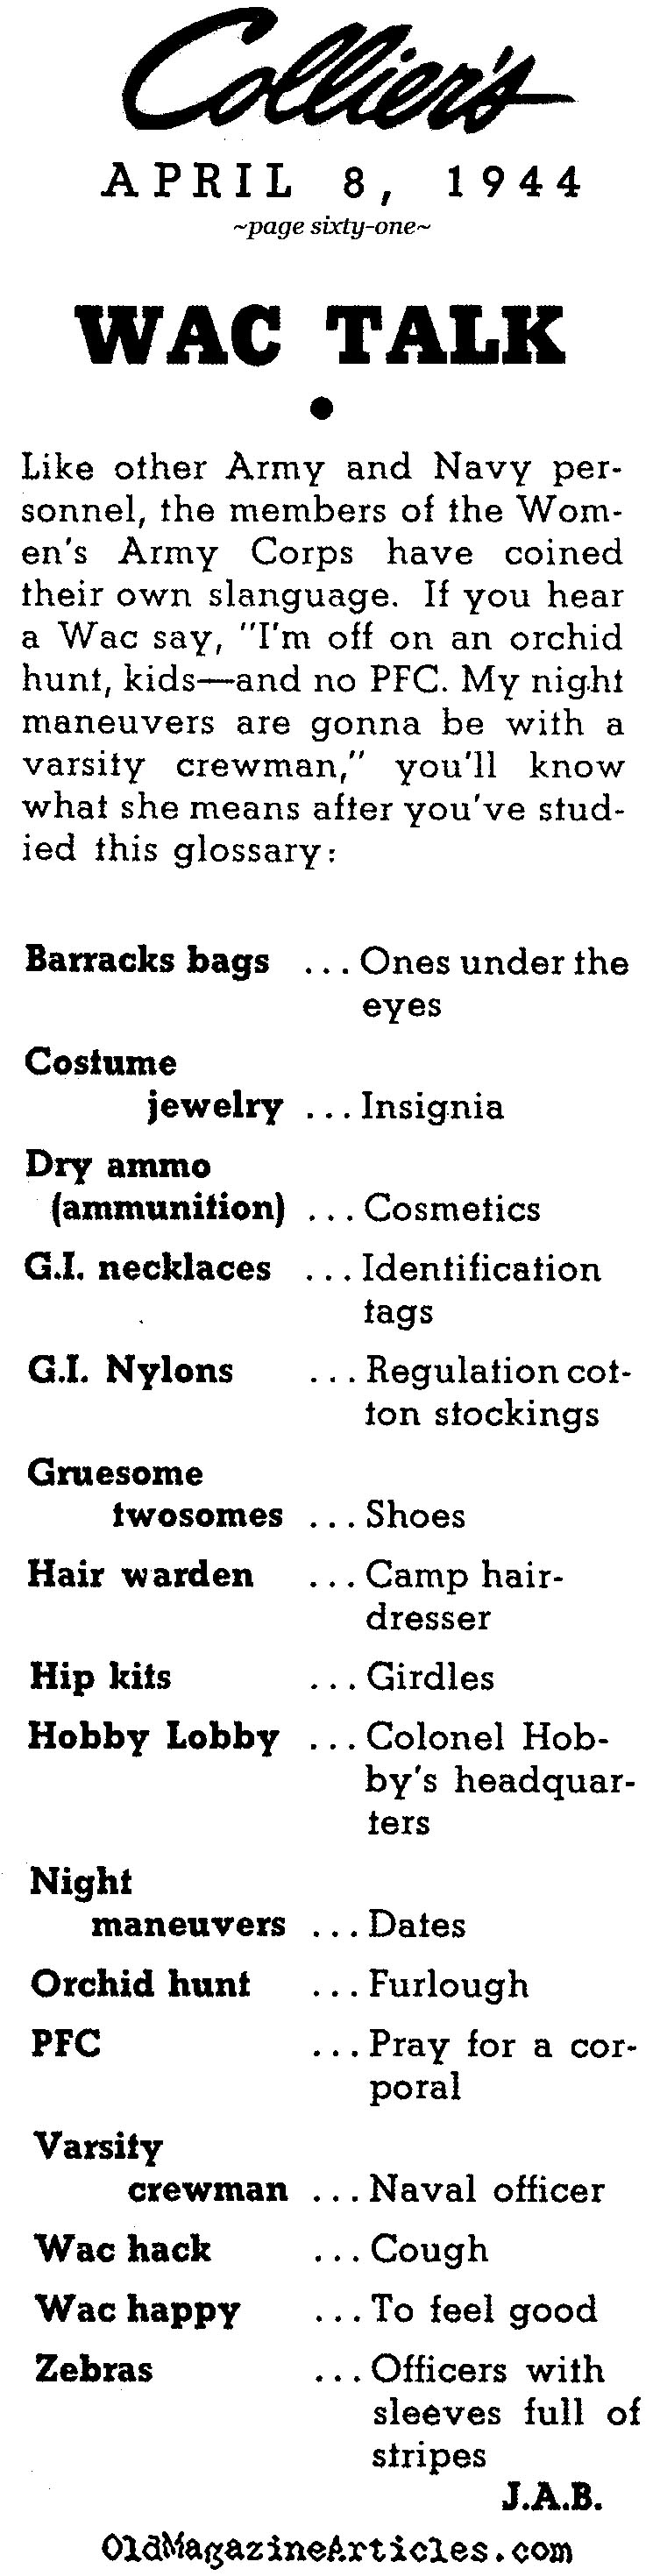 A Glossary of WAC Slang (Collier's Magazine, 1944)